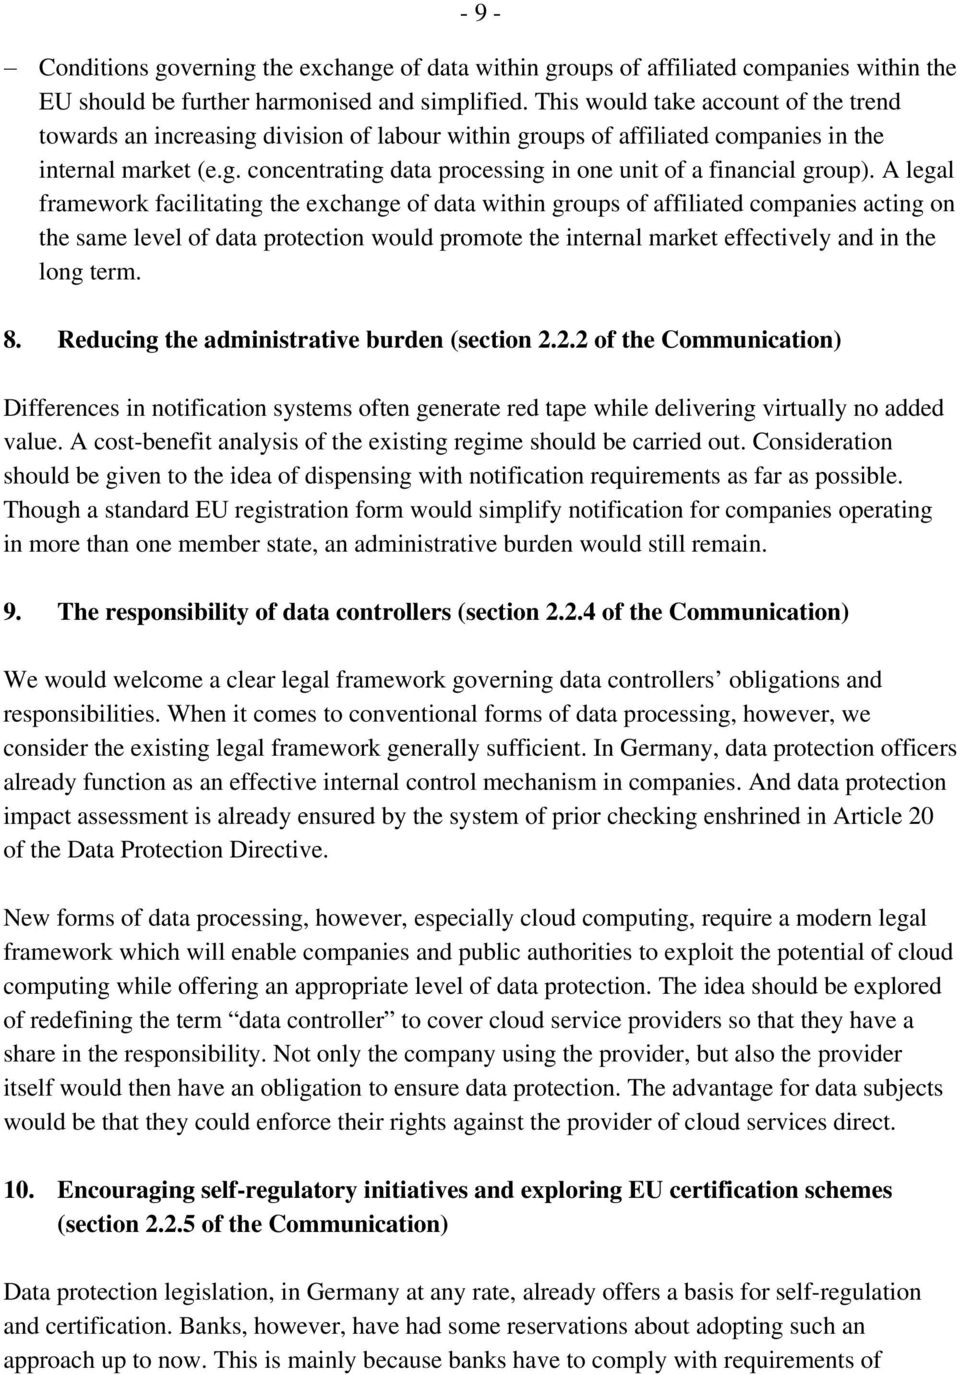 A legal framework facilitating the exchange of data within groups of affiliated companies acting on the same level of data protection would promote the internal market effectively and in the long